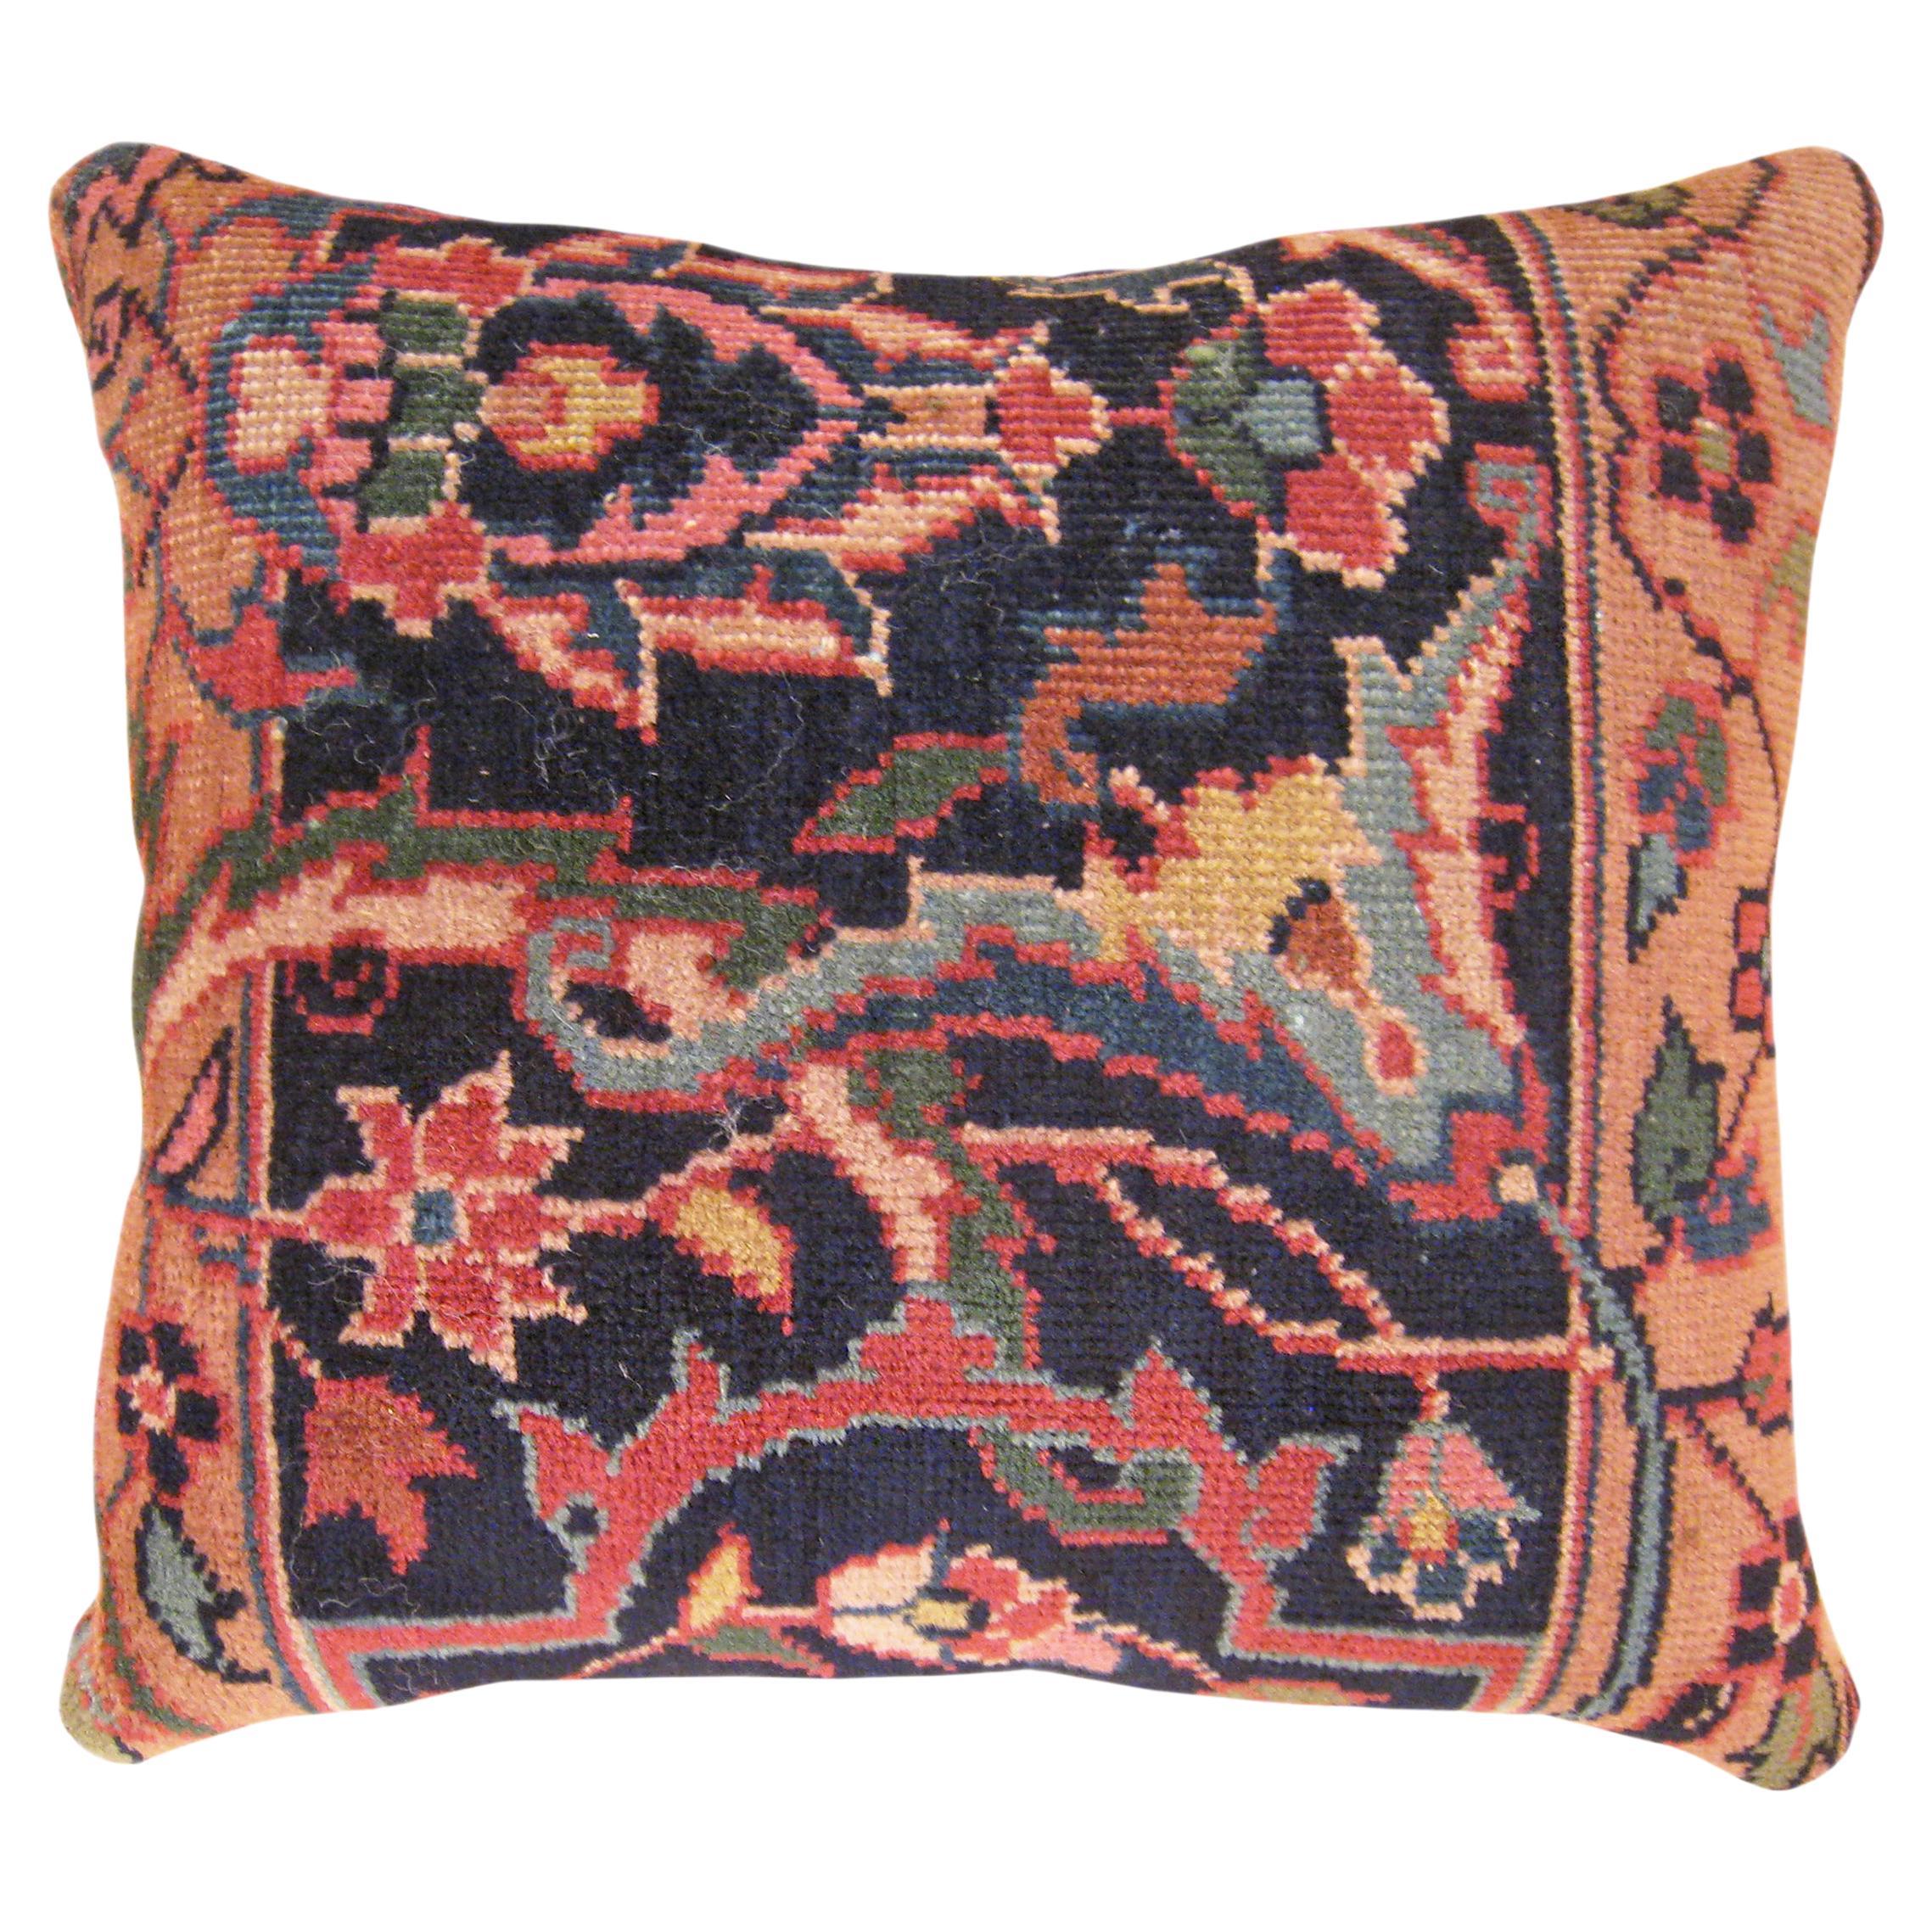 Decorative Antique Indian Agra Rug Pillow with Floral Elements